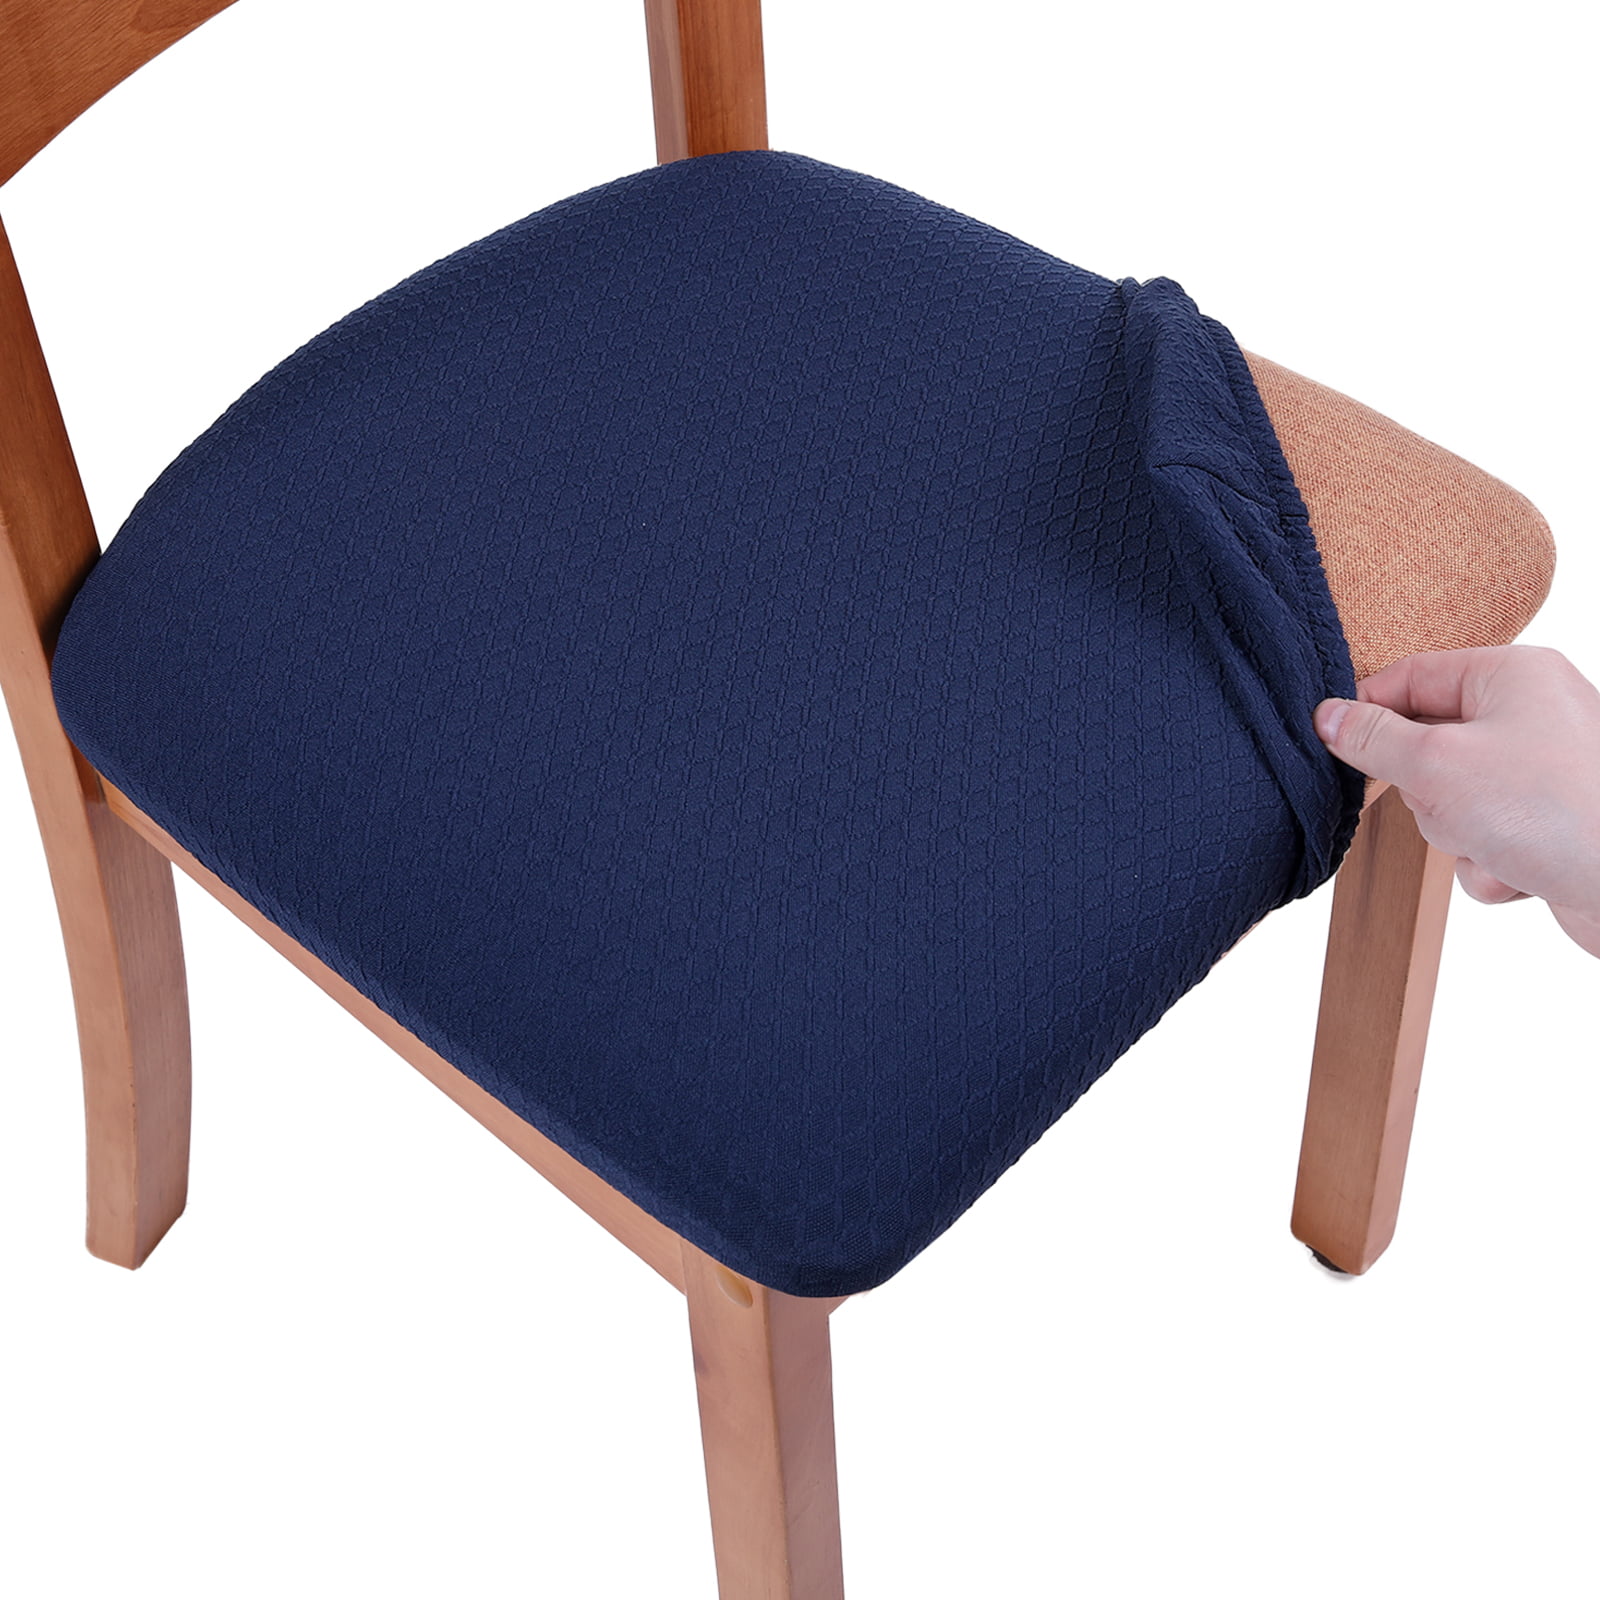 smiry Stretch Jacquard Chair Seat Covers for Dining Room Set of 2 Removable Washable Anti-Dust Chair Seat Protector Slipcovers Navy Blue